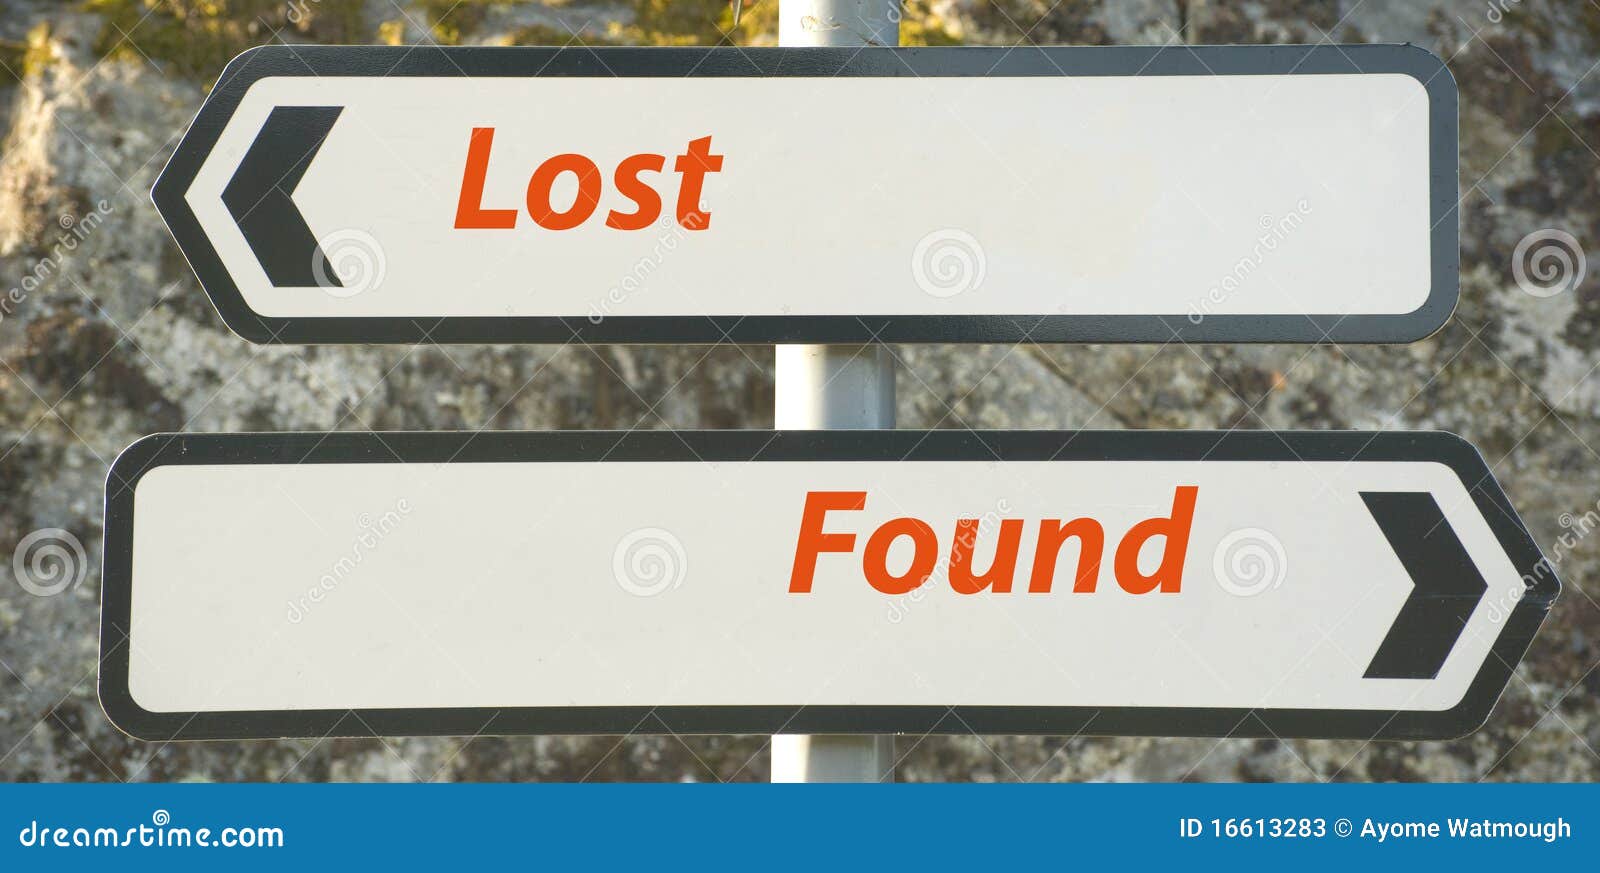 lost and found.